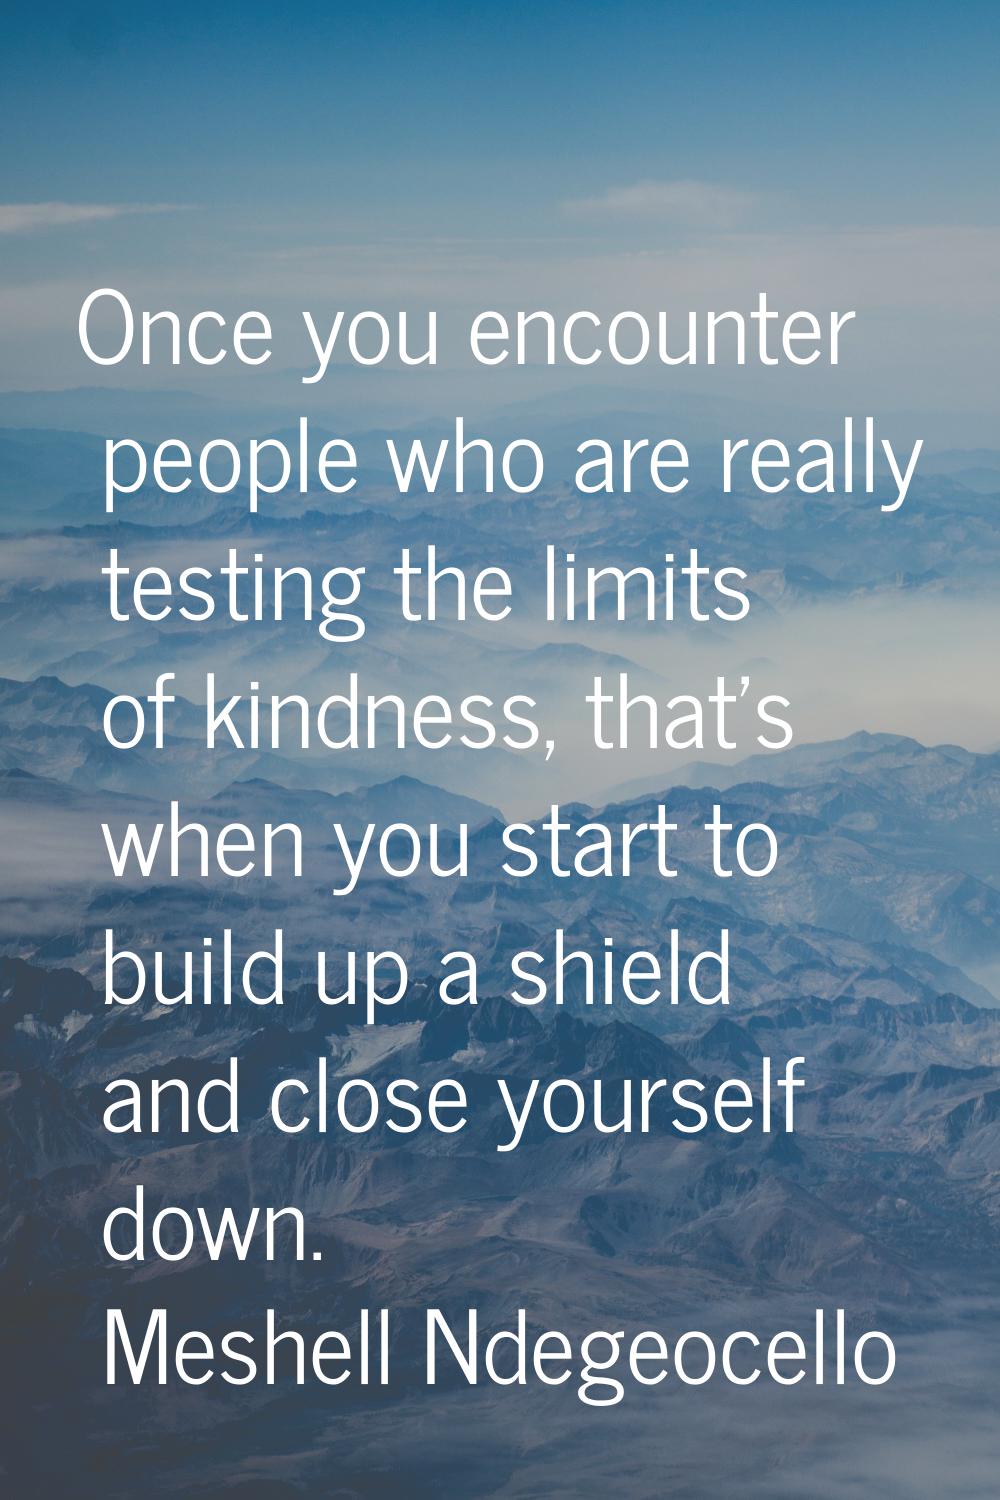 Once you encounter people who are really testing the limits of kindness, that's when you start to b